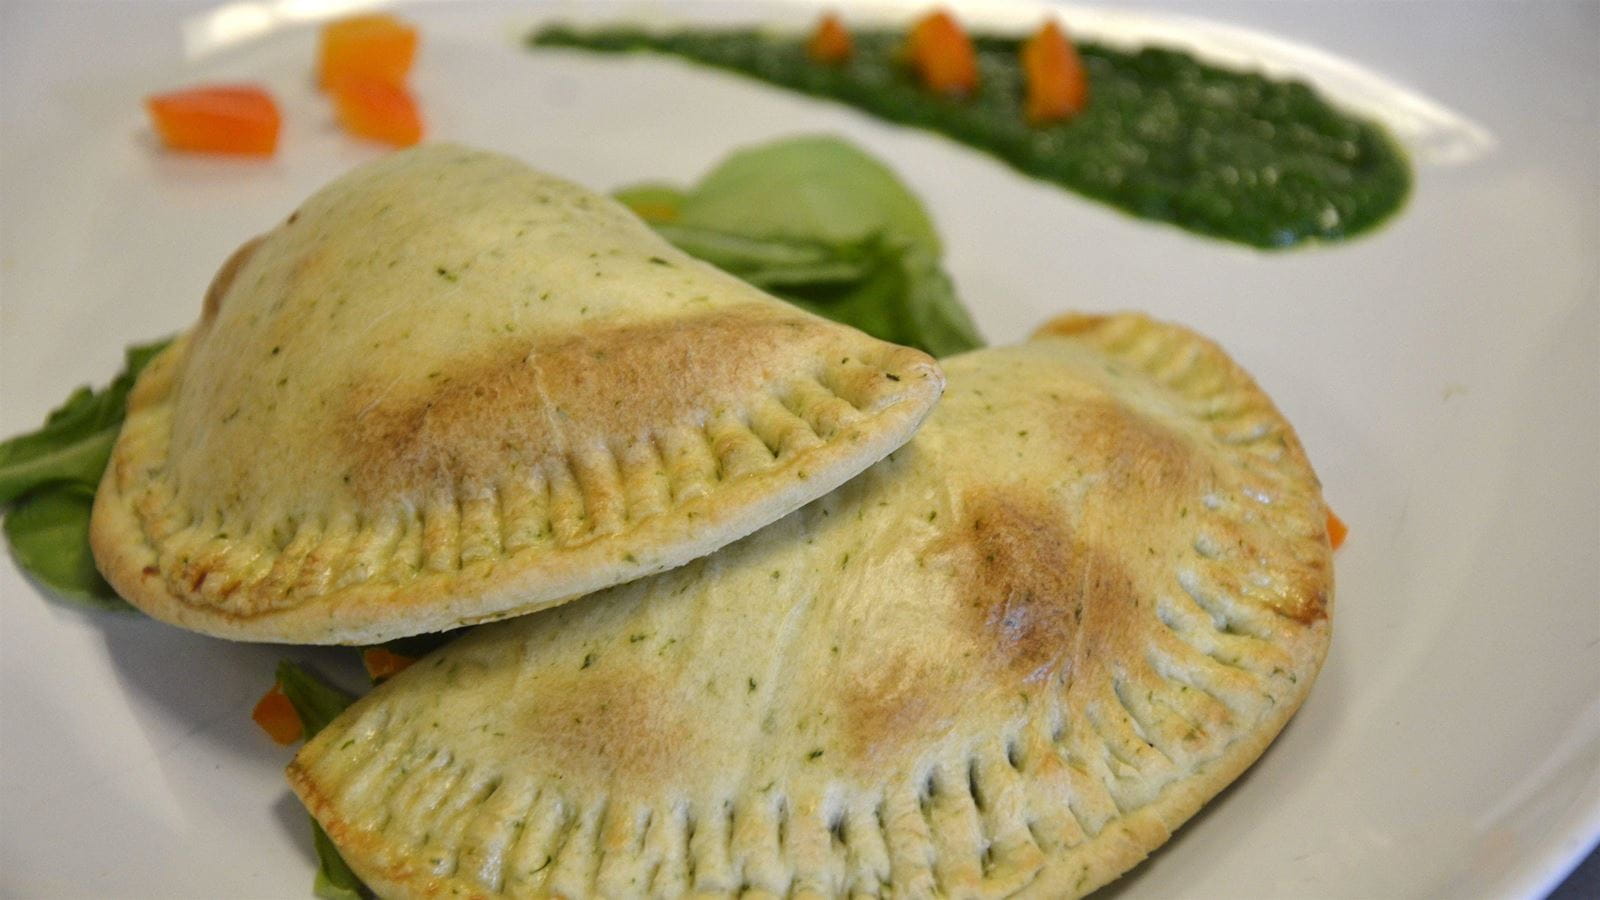 One team made empanadas with vegetables that would be grown at Longwood Gardens.